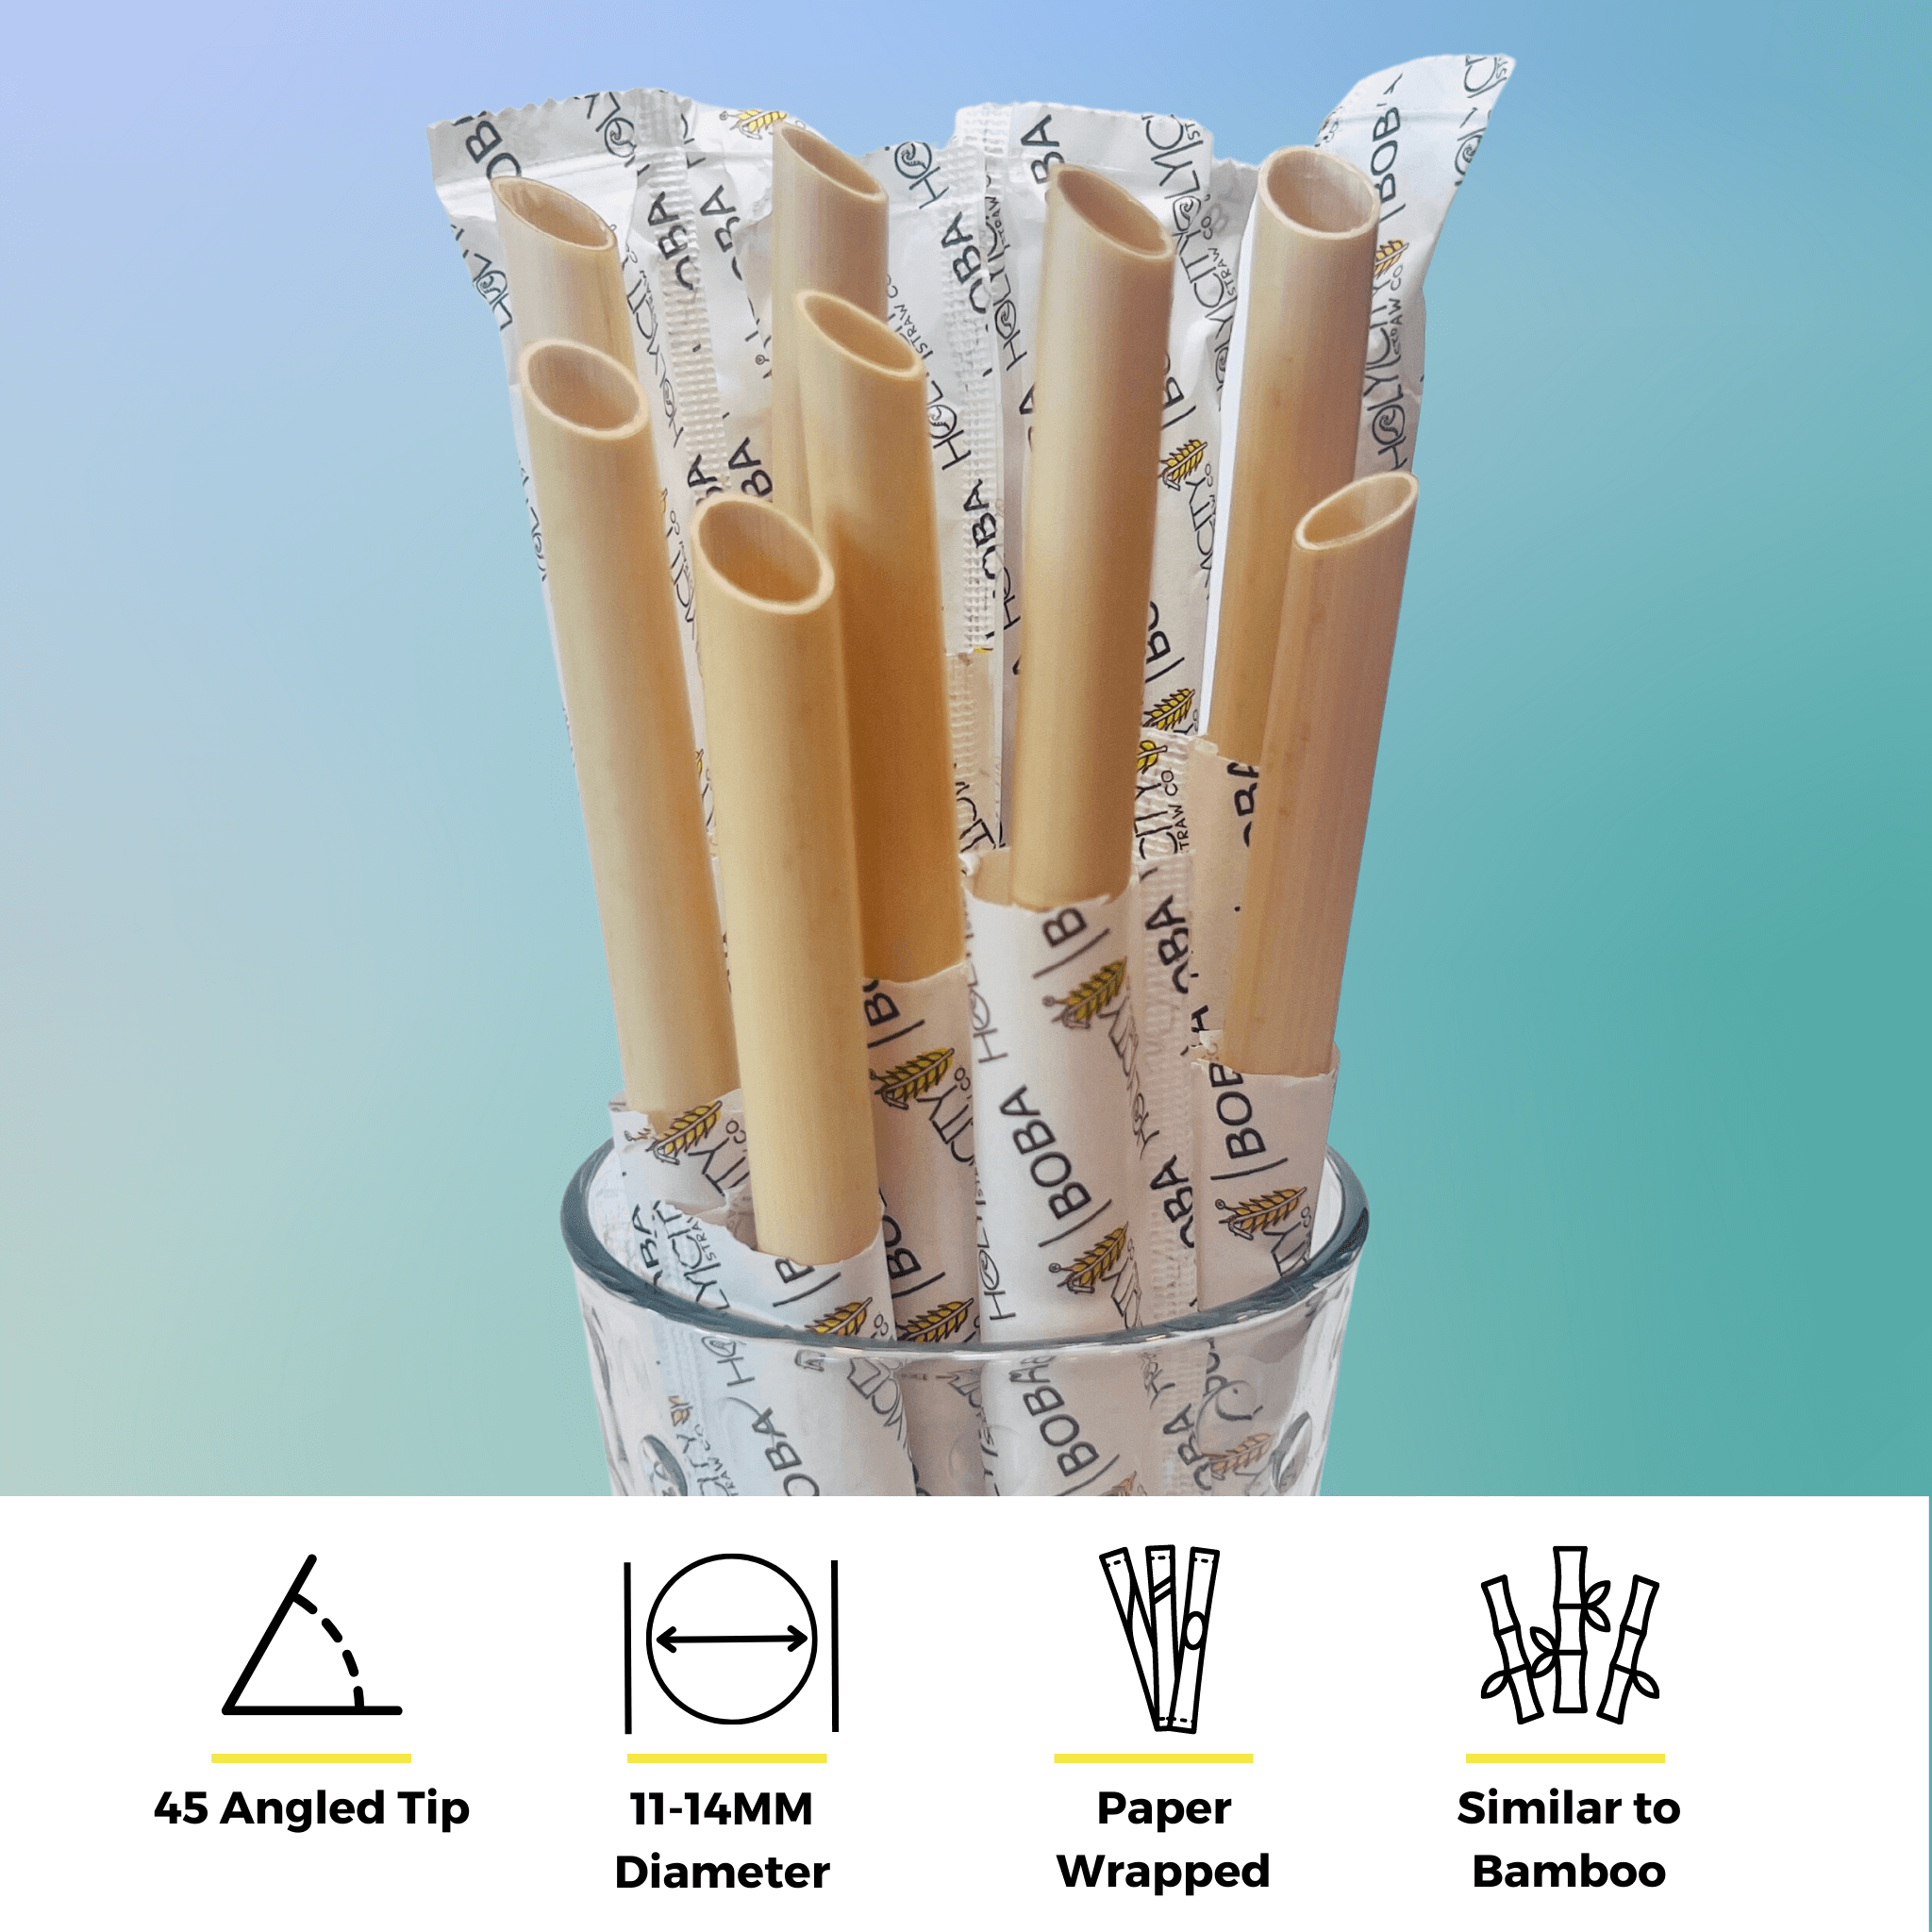 Glass of unwrapped boba straws highlighting the angled tip wide diameter paper wrapped and bamboo